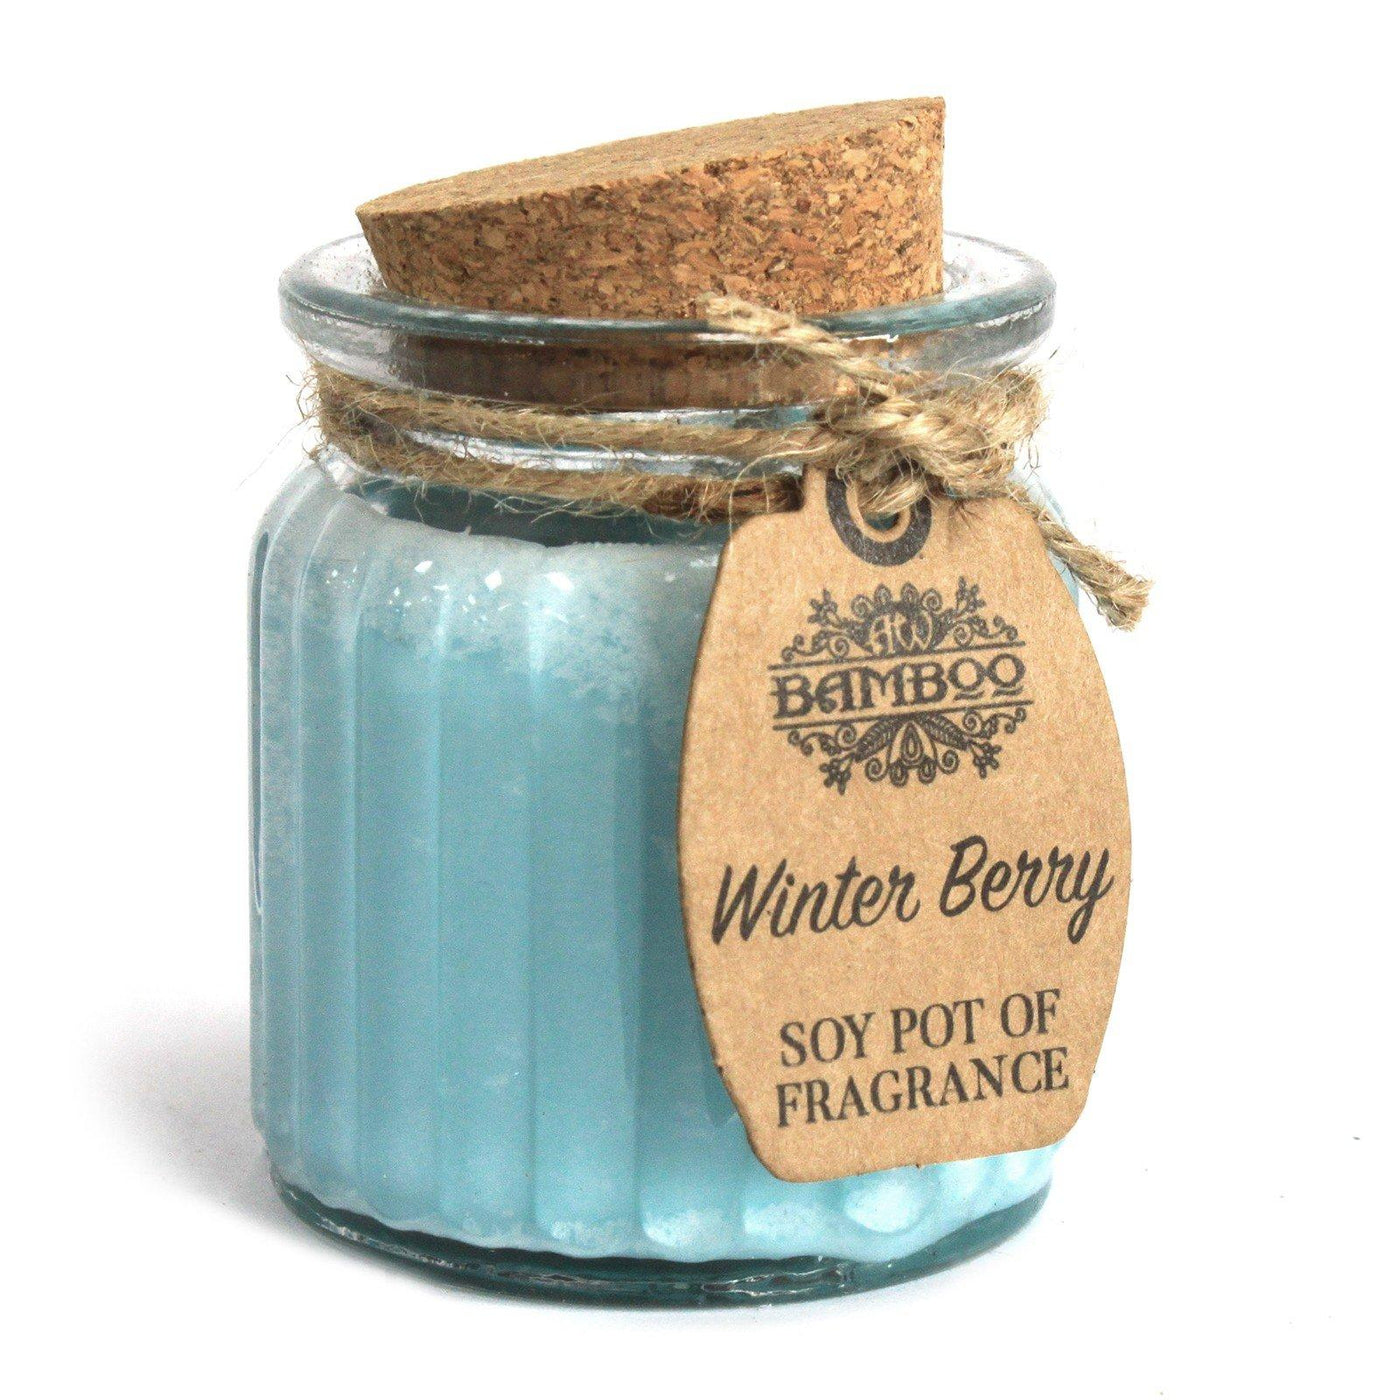 2x Winter Berry Soy Pot of Fragrance Candles.